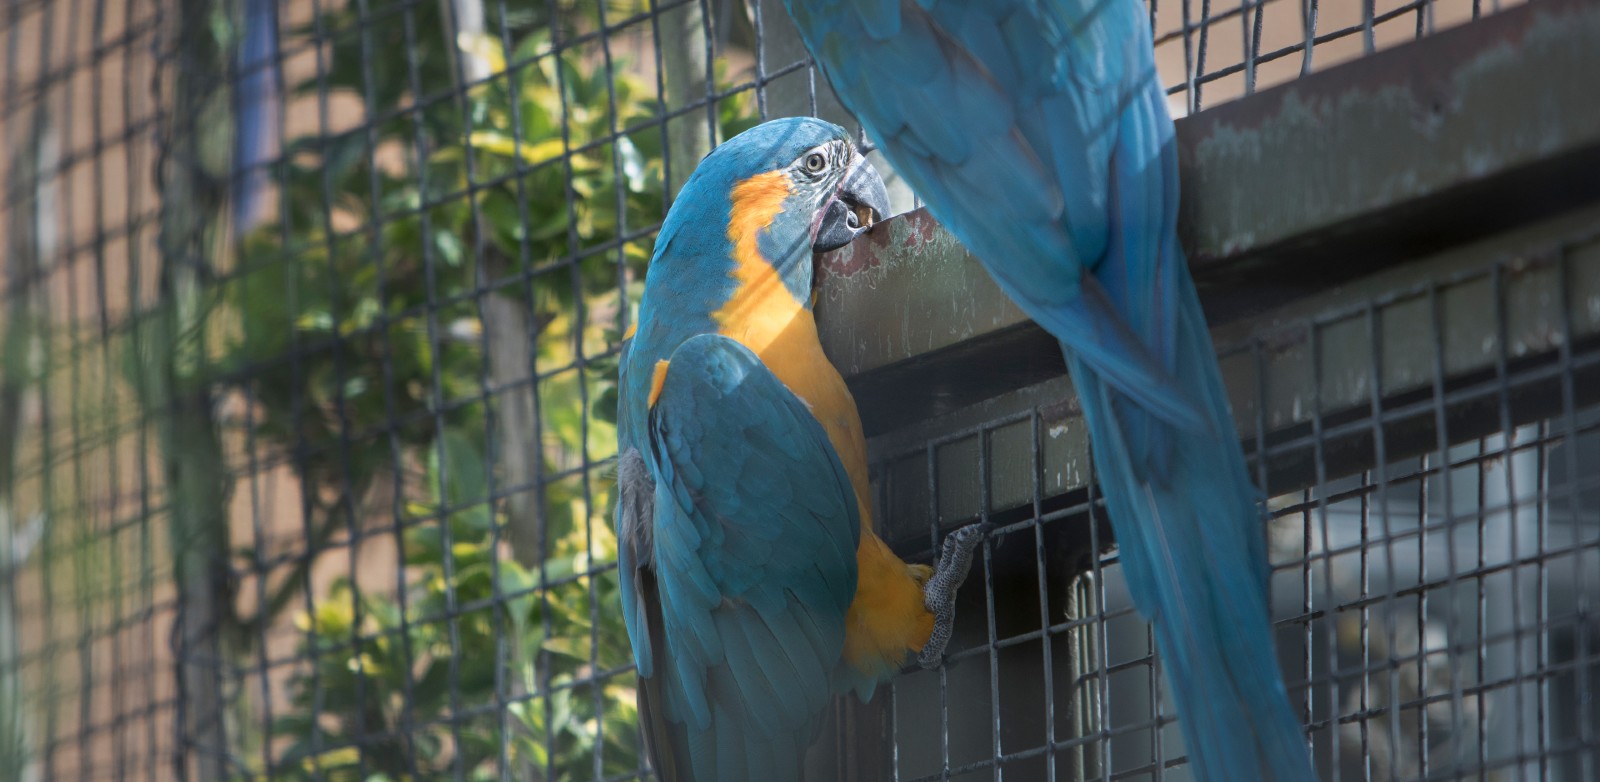 Two blue and yellow parrots are inside a cage. They are climbing up and biting the bars. One parrot is in full view and the other is higher up so only the tail is visible.